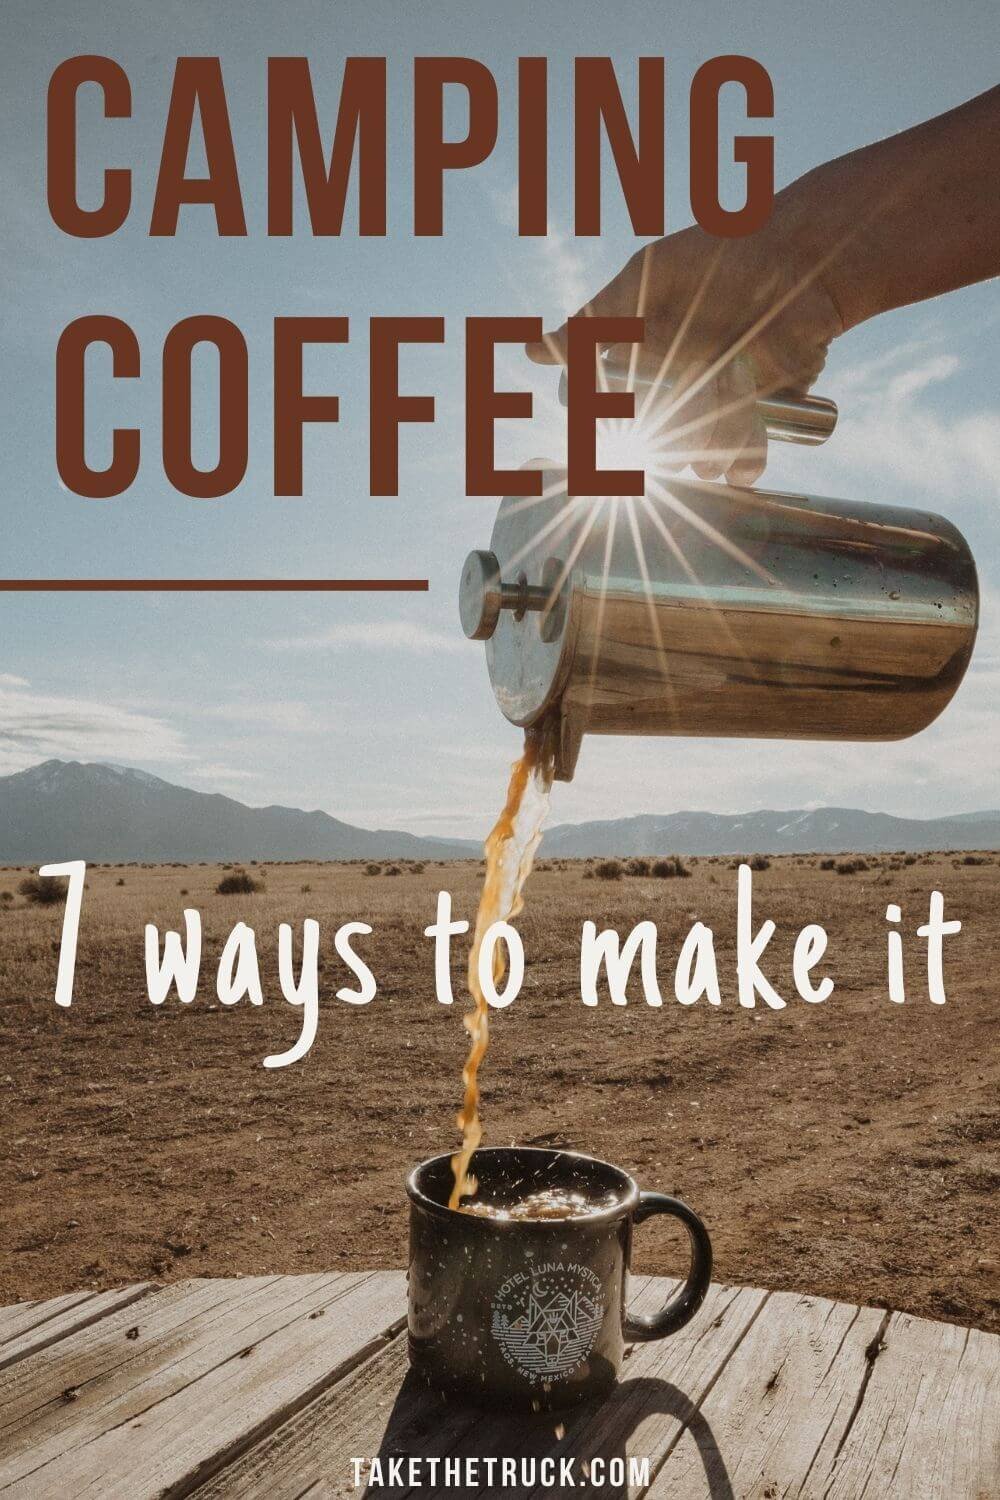 Knowing how to make camping coffee is a must for any camping trip! This guide gives step-by-step instructions on seven different ways to make delicious camp coffee.